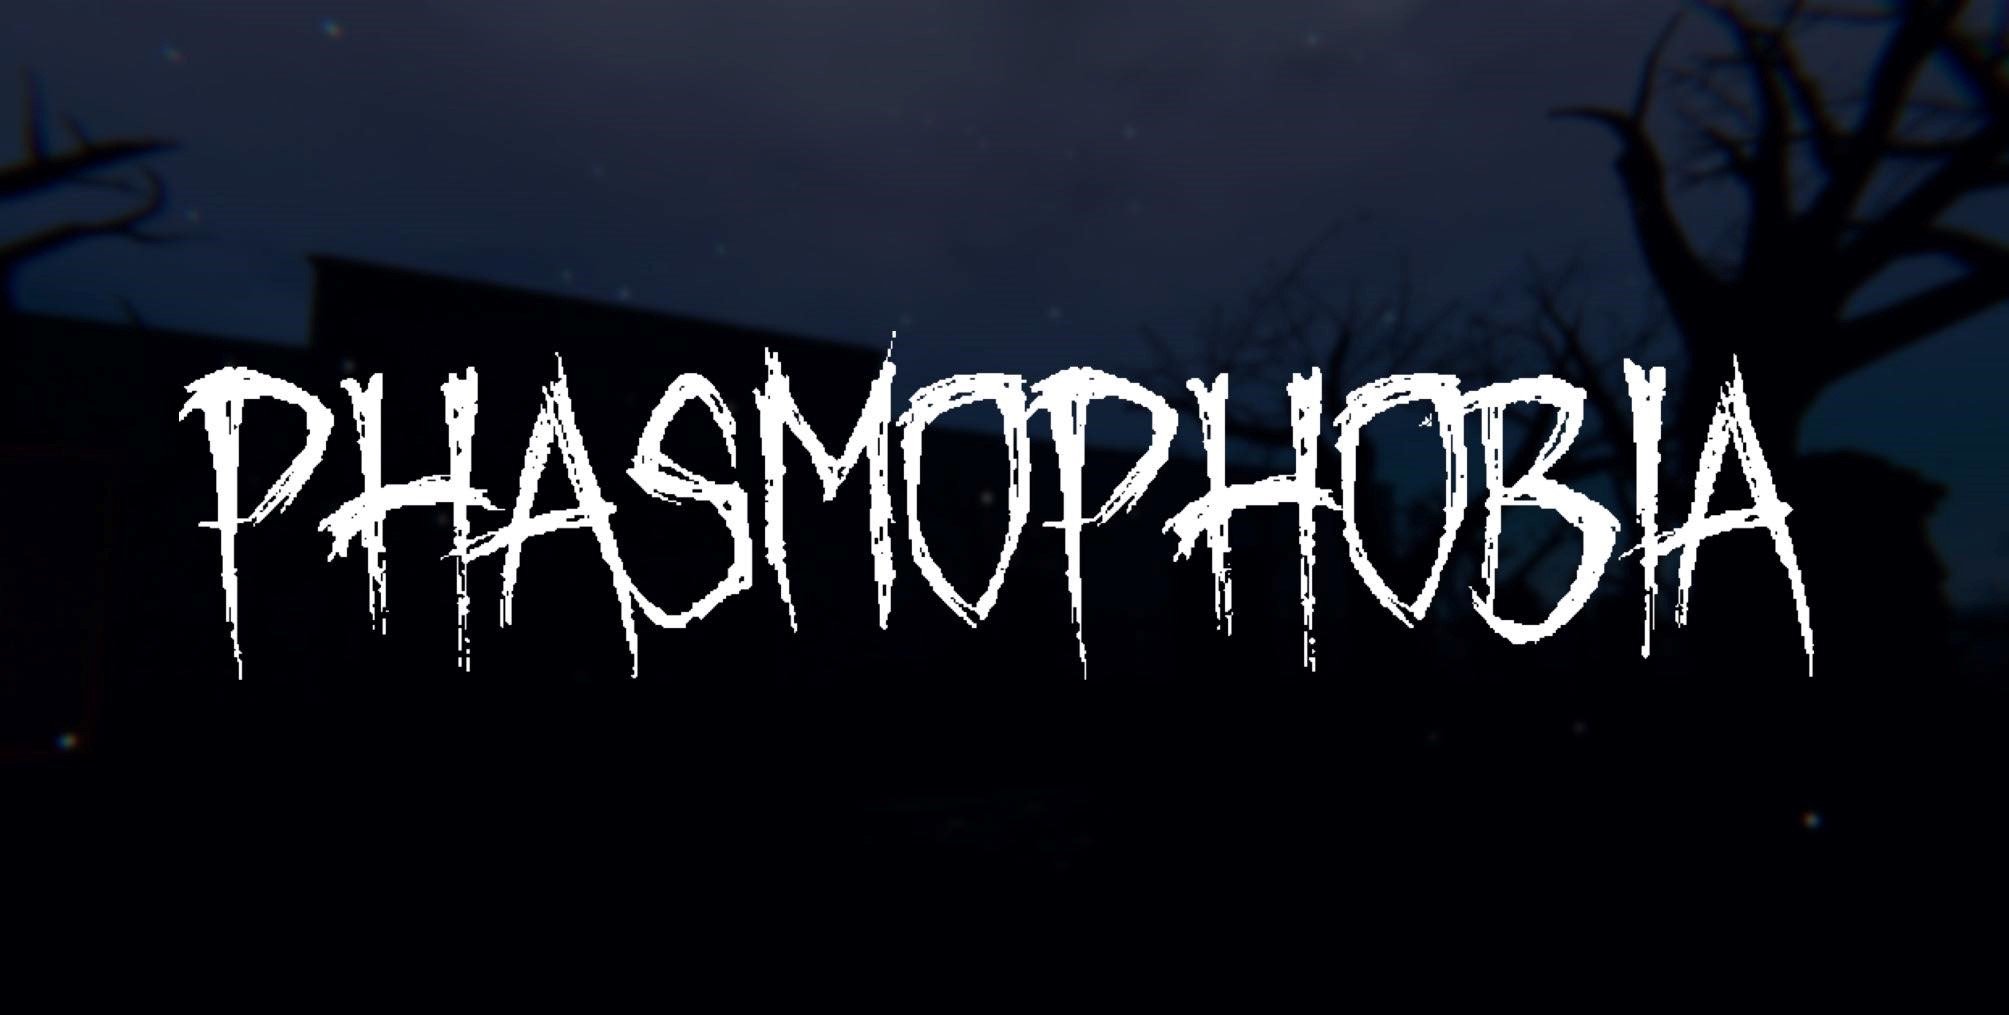 Phasmophobia Update Roadmap When Is the Next Phasmophobia update